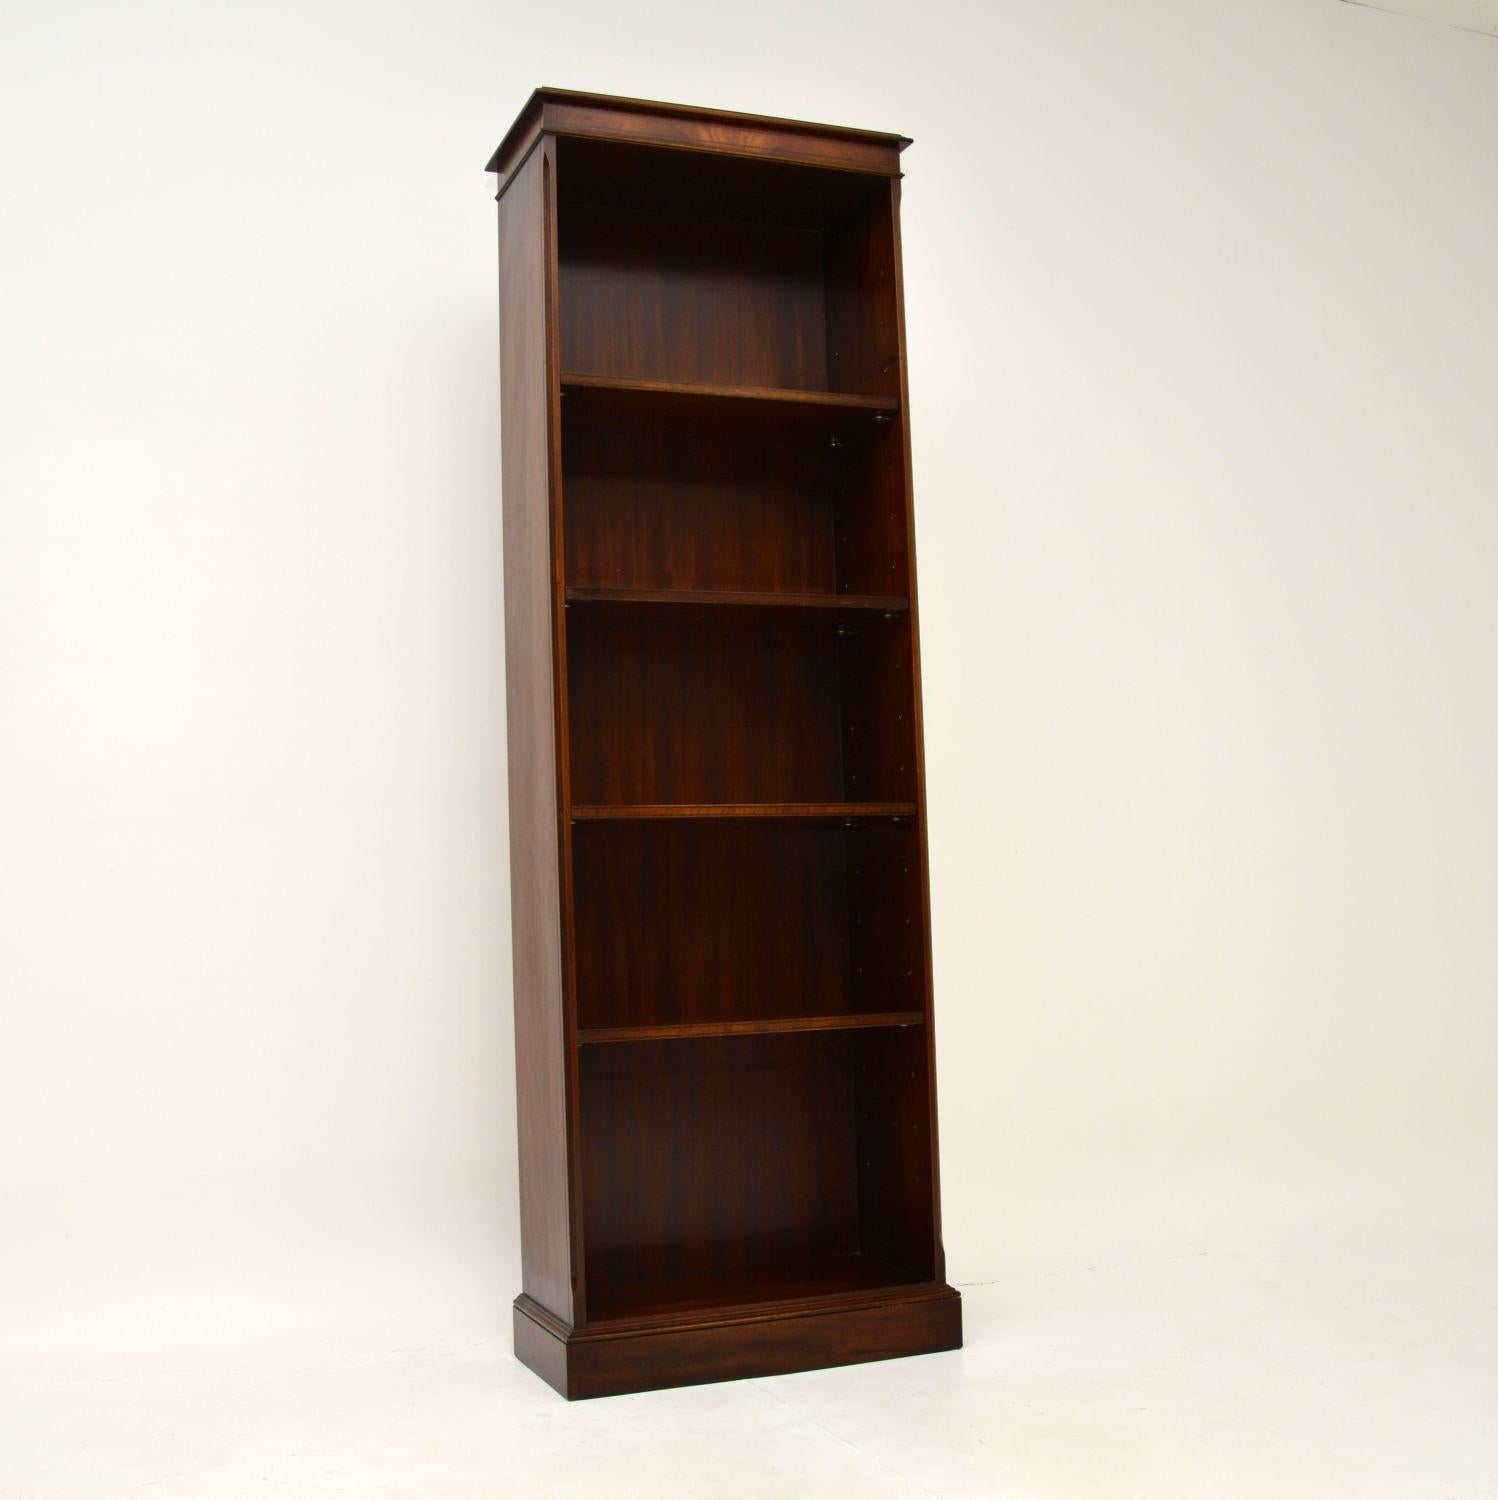 A smart and very useful slim open bookcase in the antique Georgian style. This was made in England, it dates from around the 1960’s.

It is of fantastic quality, with four adjustable and removable shelves. The size is very useful, it takes up very